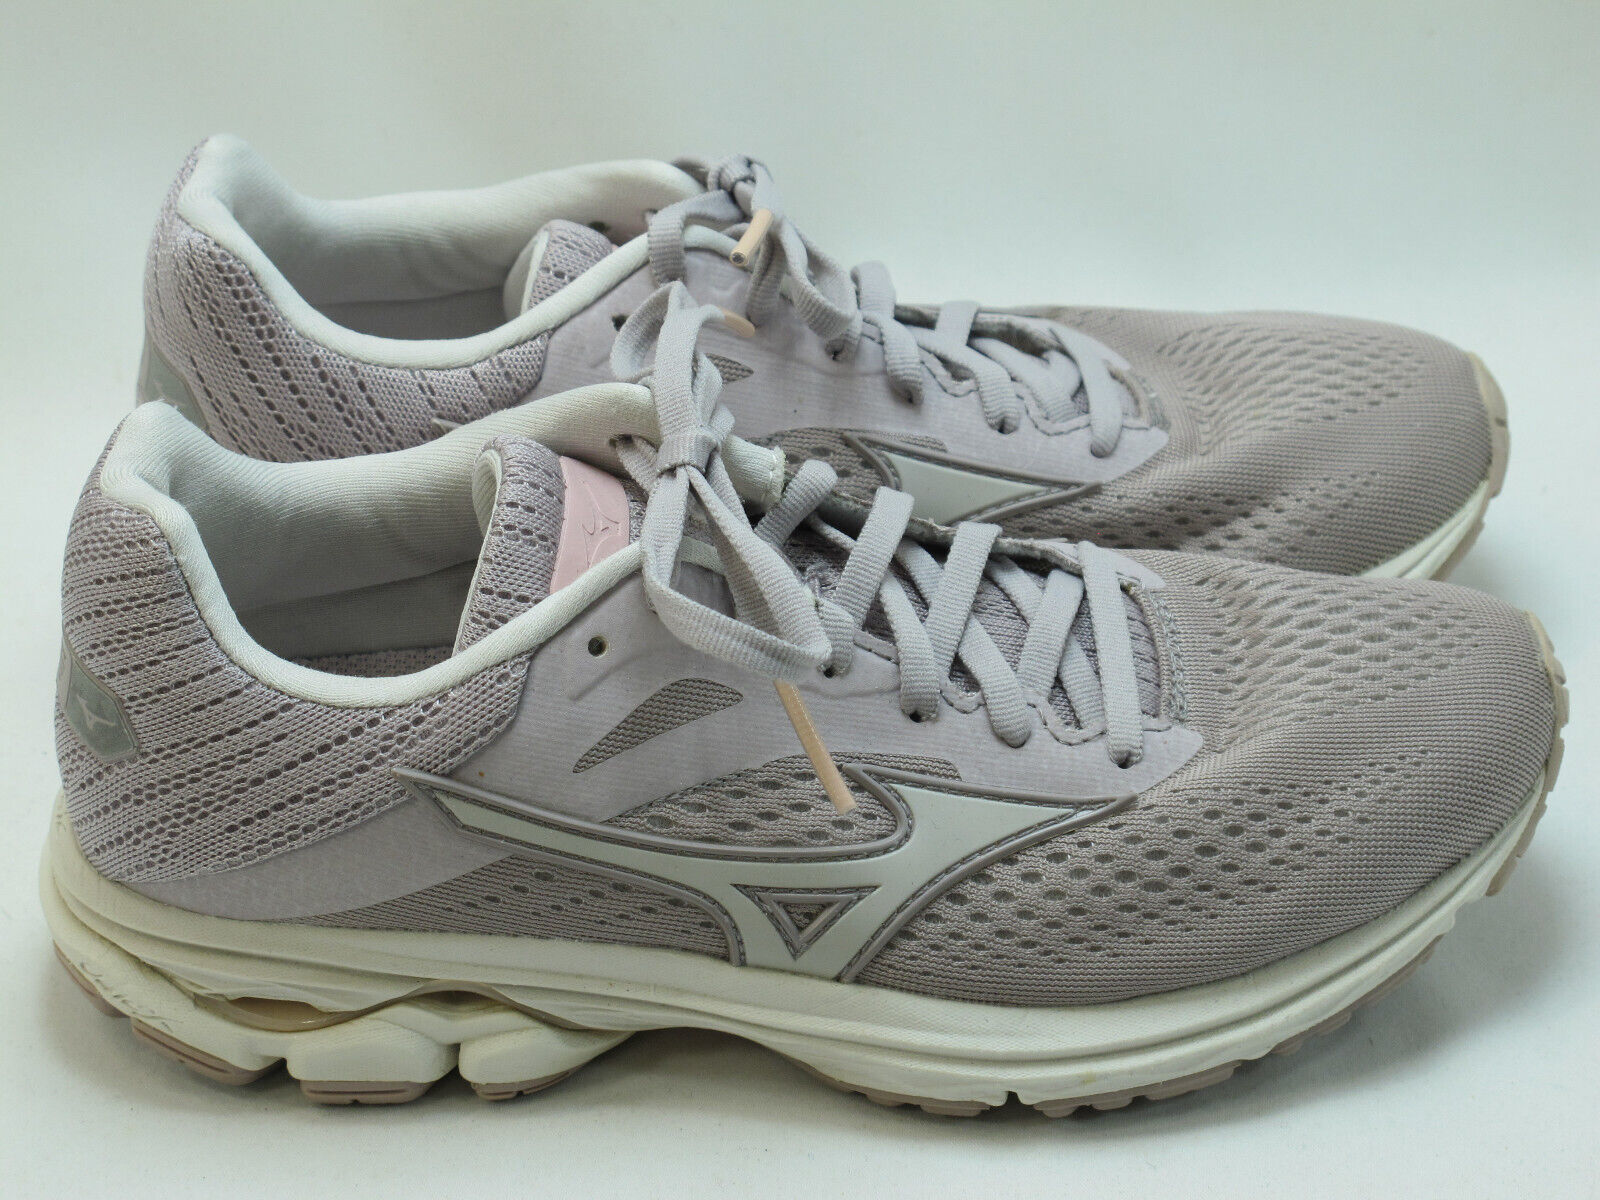 Primary image for Mizuno Wave Rider 23 Running Shoes Women’s Size 7.5 US Excellent Plus Condition